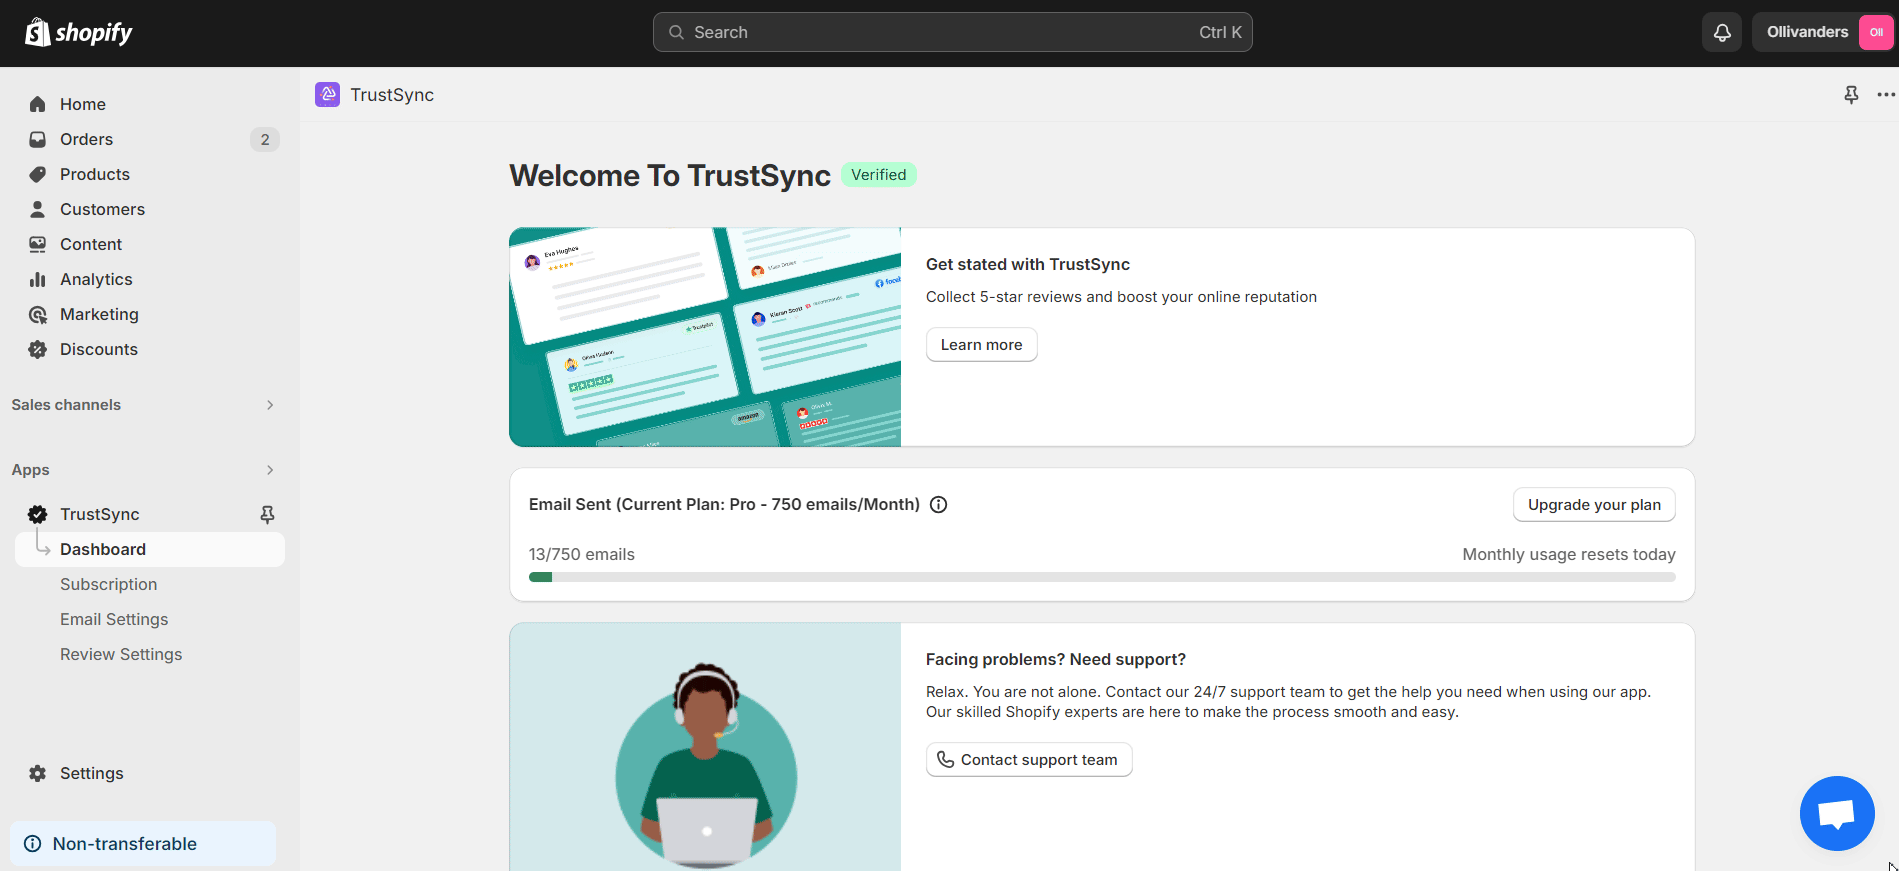 How To Find & Add Review Link For Trustpilot?